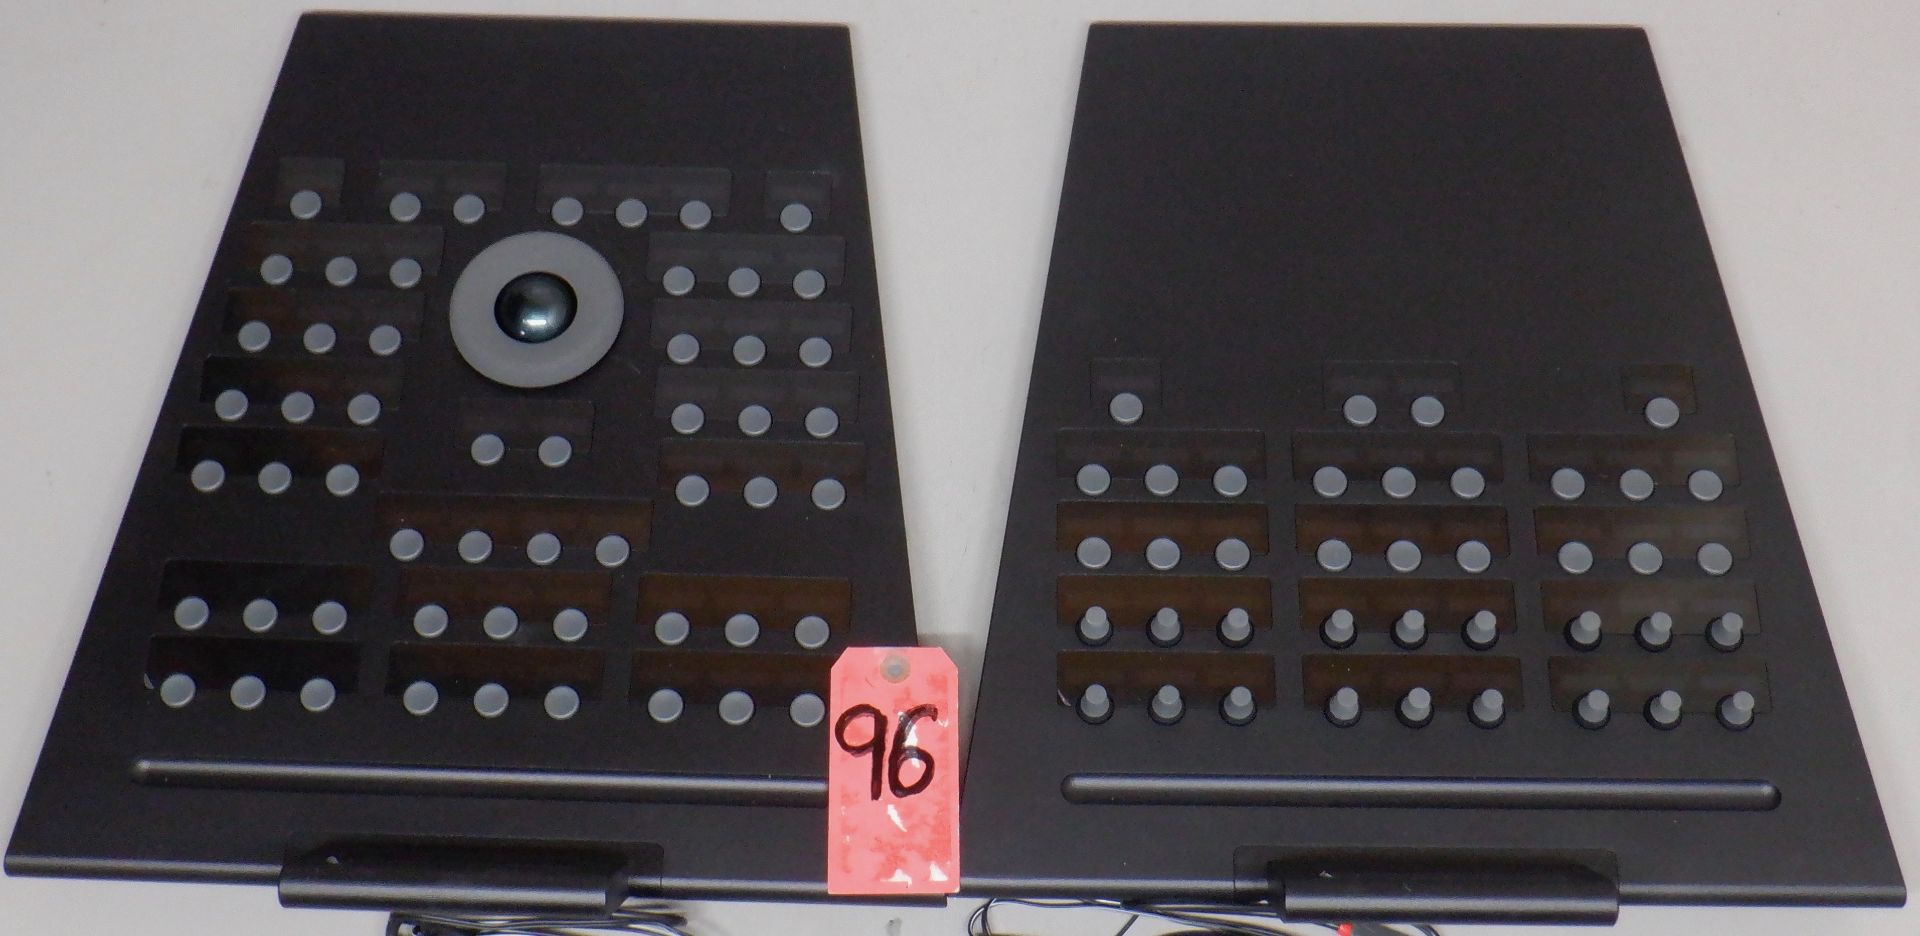 LOT OF 2 TANGENT REMOTE CONTROL PANELS